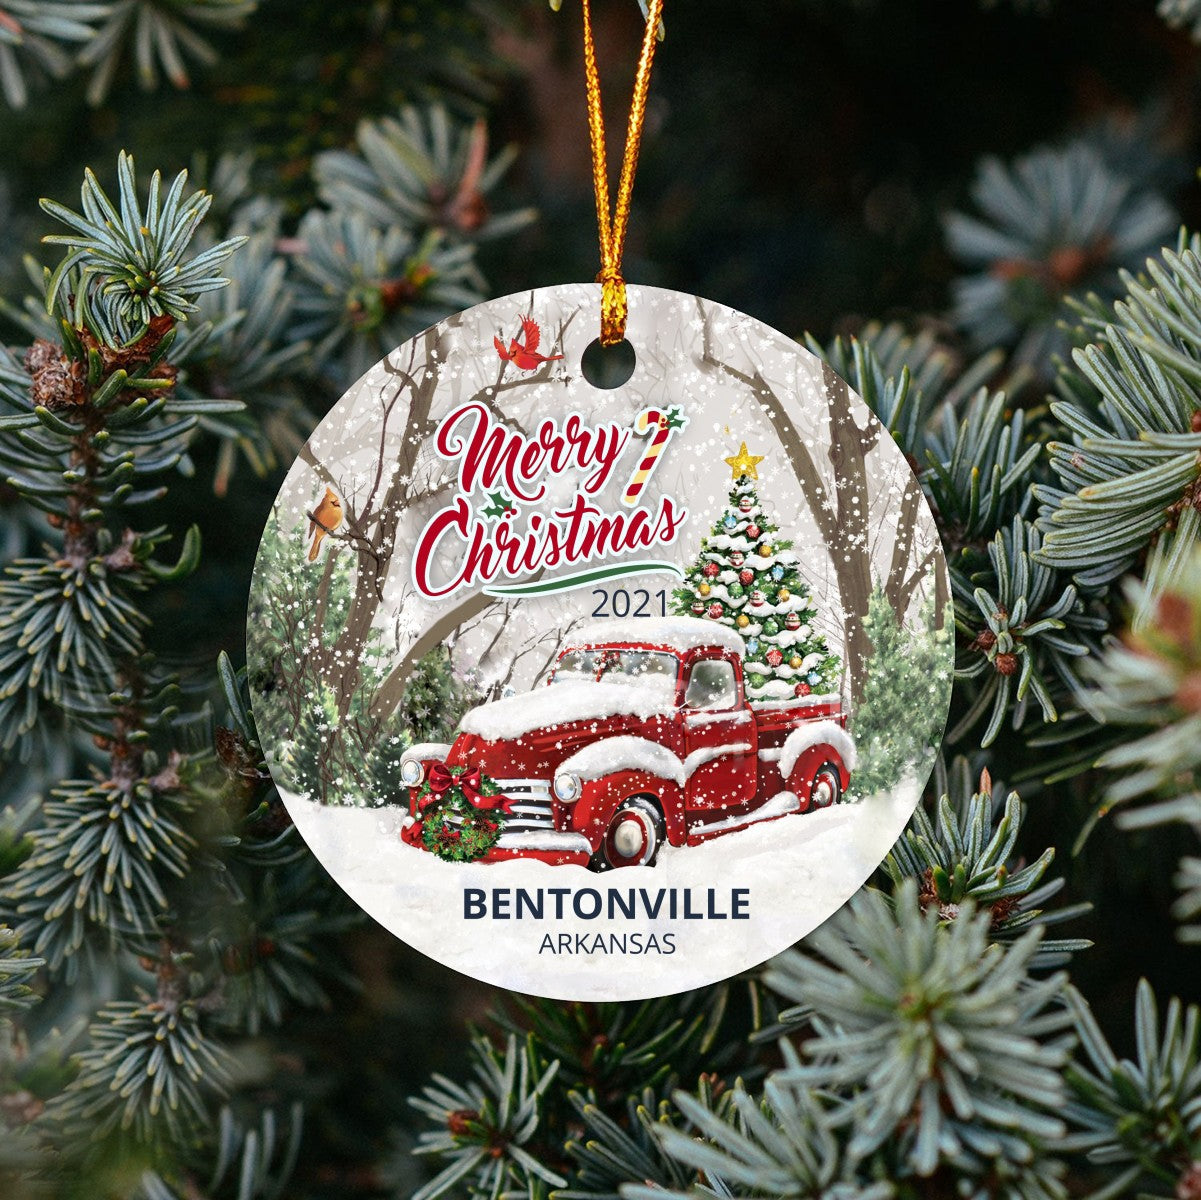 Christmas Tree Ornaments Bentonville - Ornament Customize With Name City And State Bentonville Arkansas AR - Red Truck Xmas Ornaments 3'' Plastic Gift For Family, Friend And Housewarming